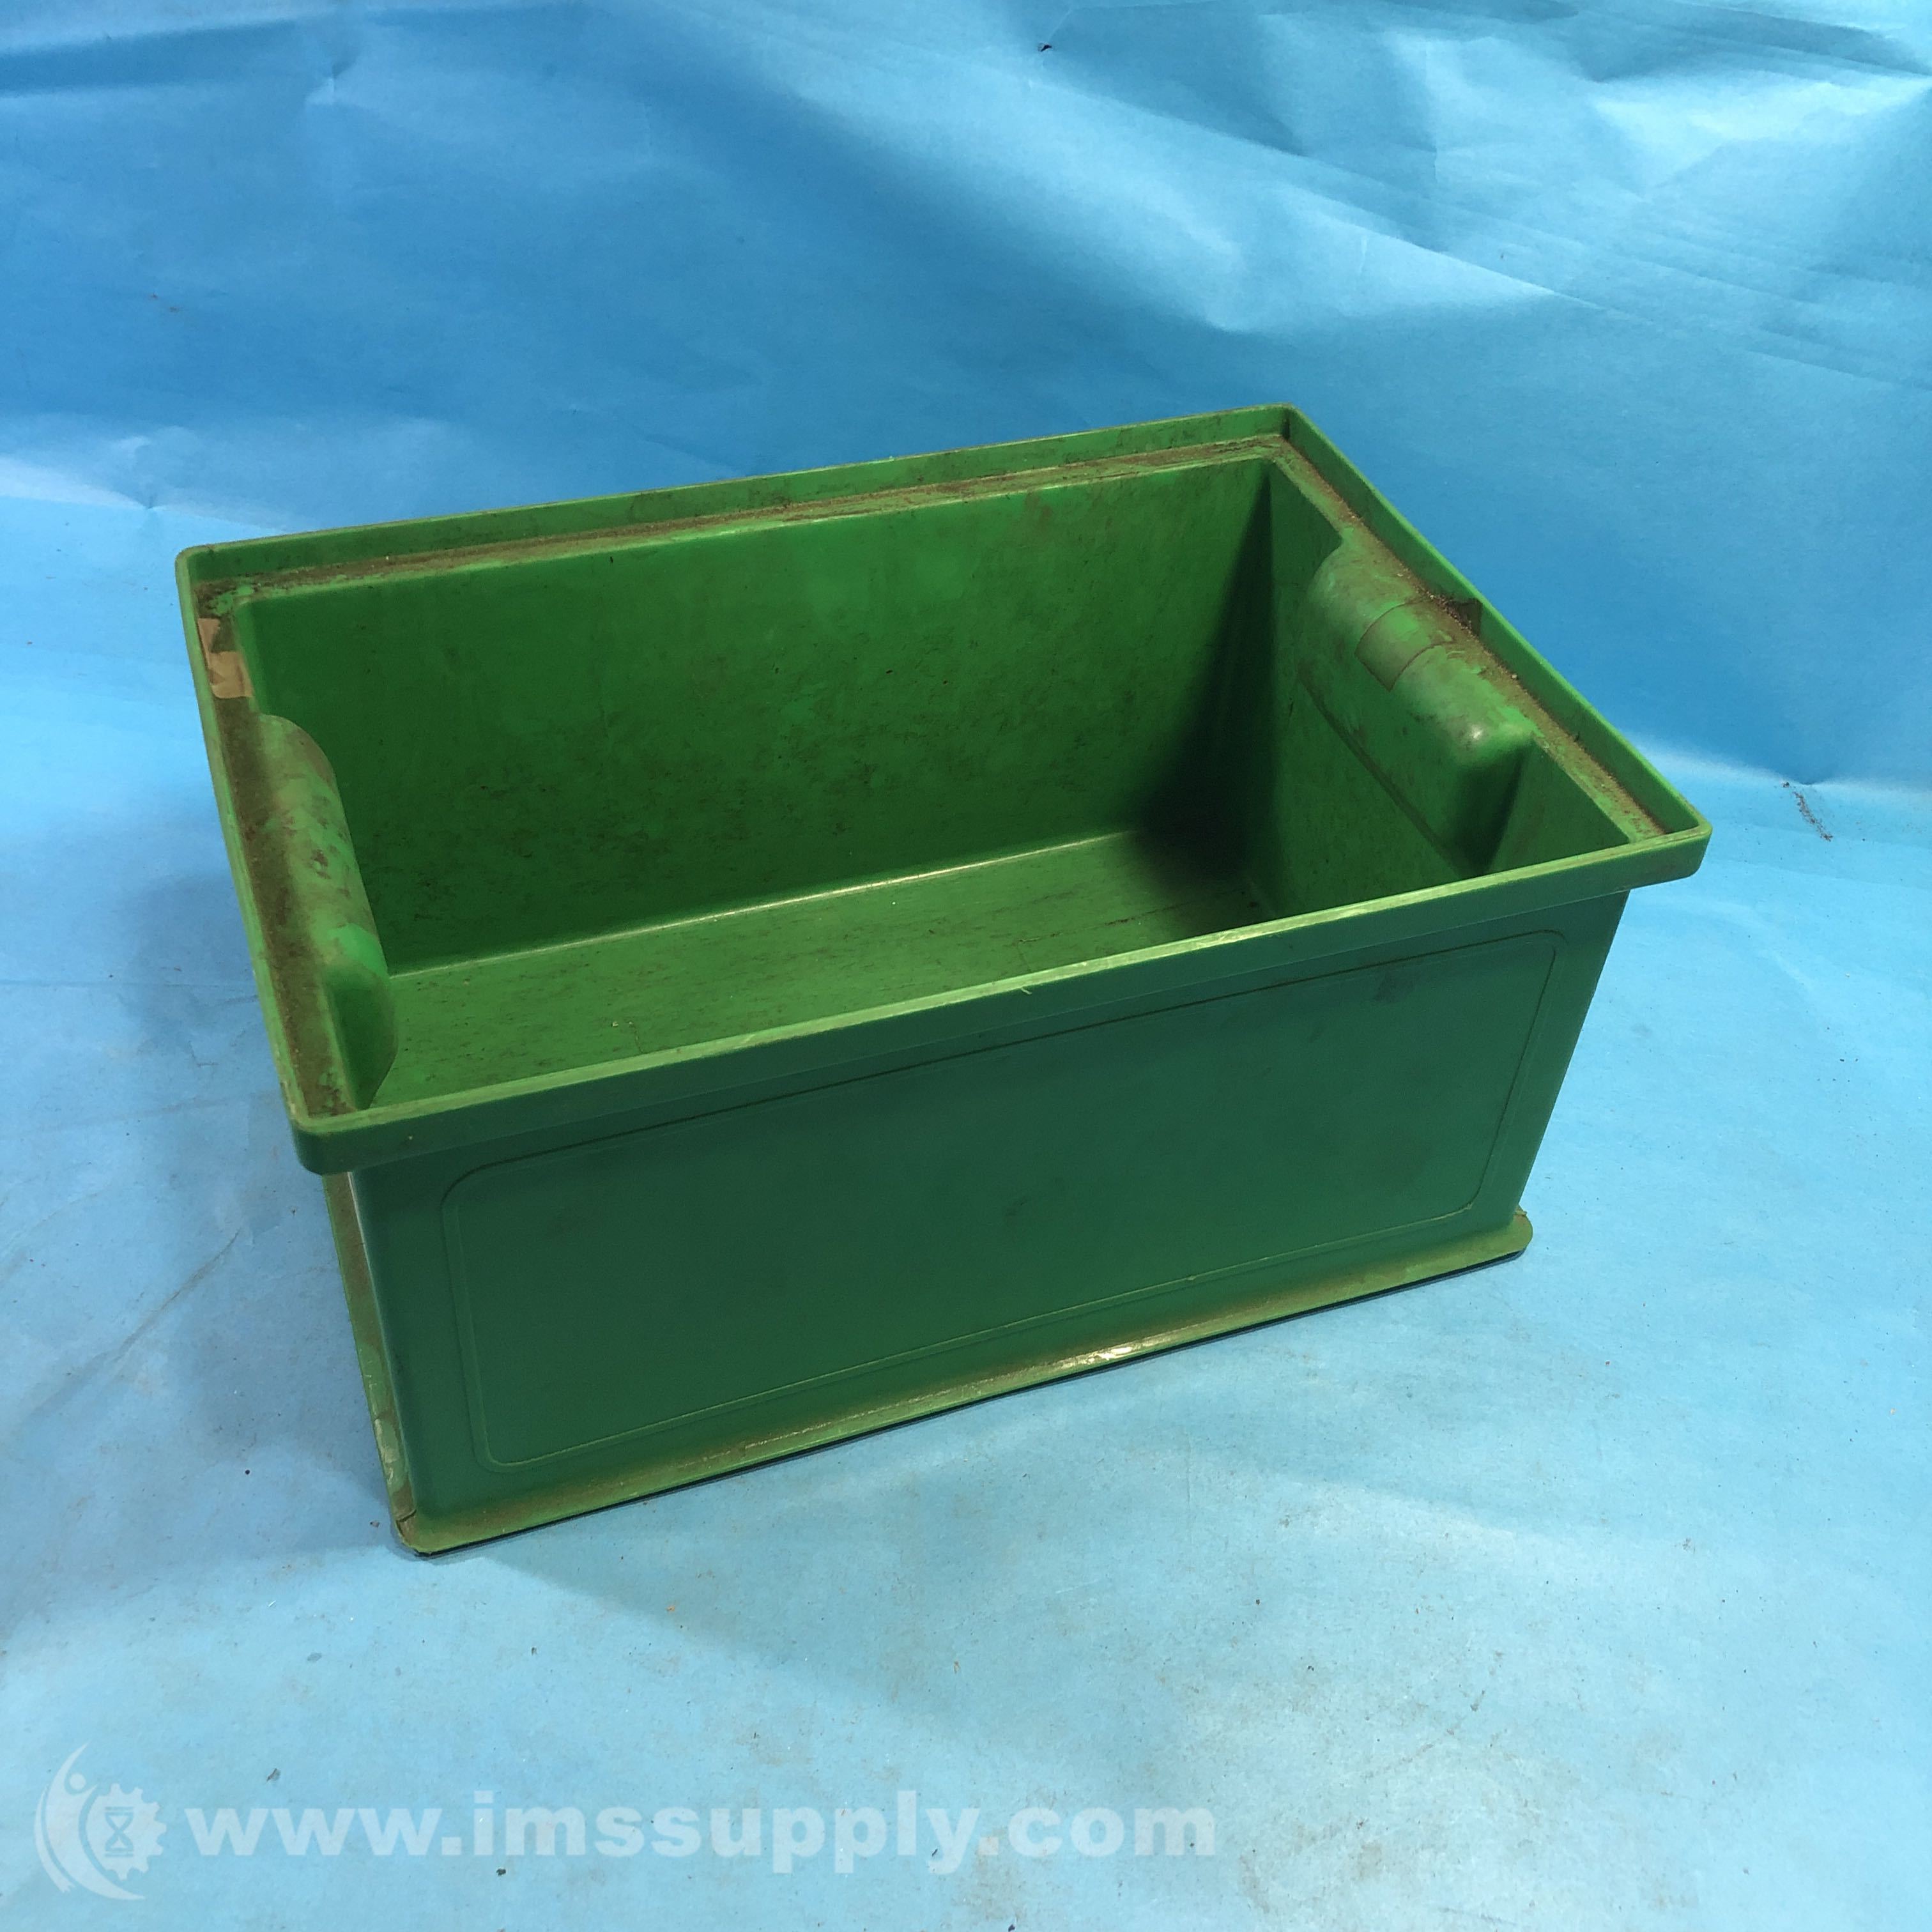 Ssi Schaefer 14/6-3 Green Stacking Transport Container USIP 